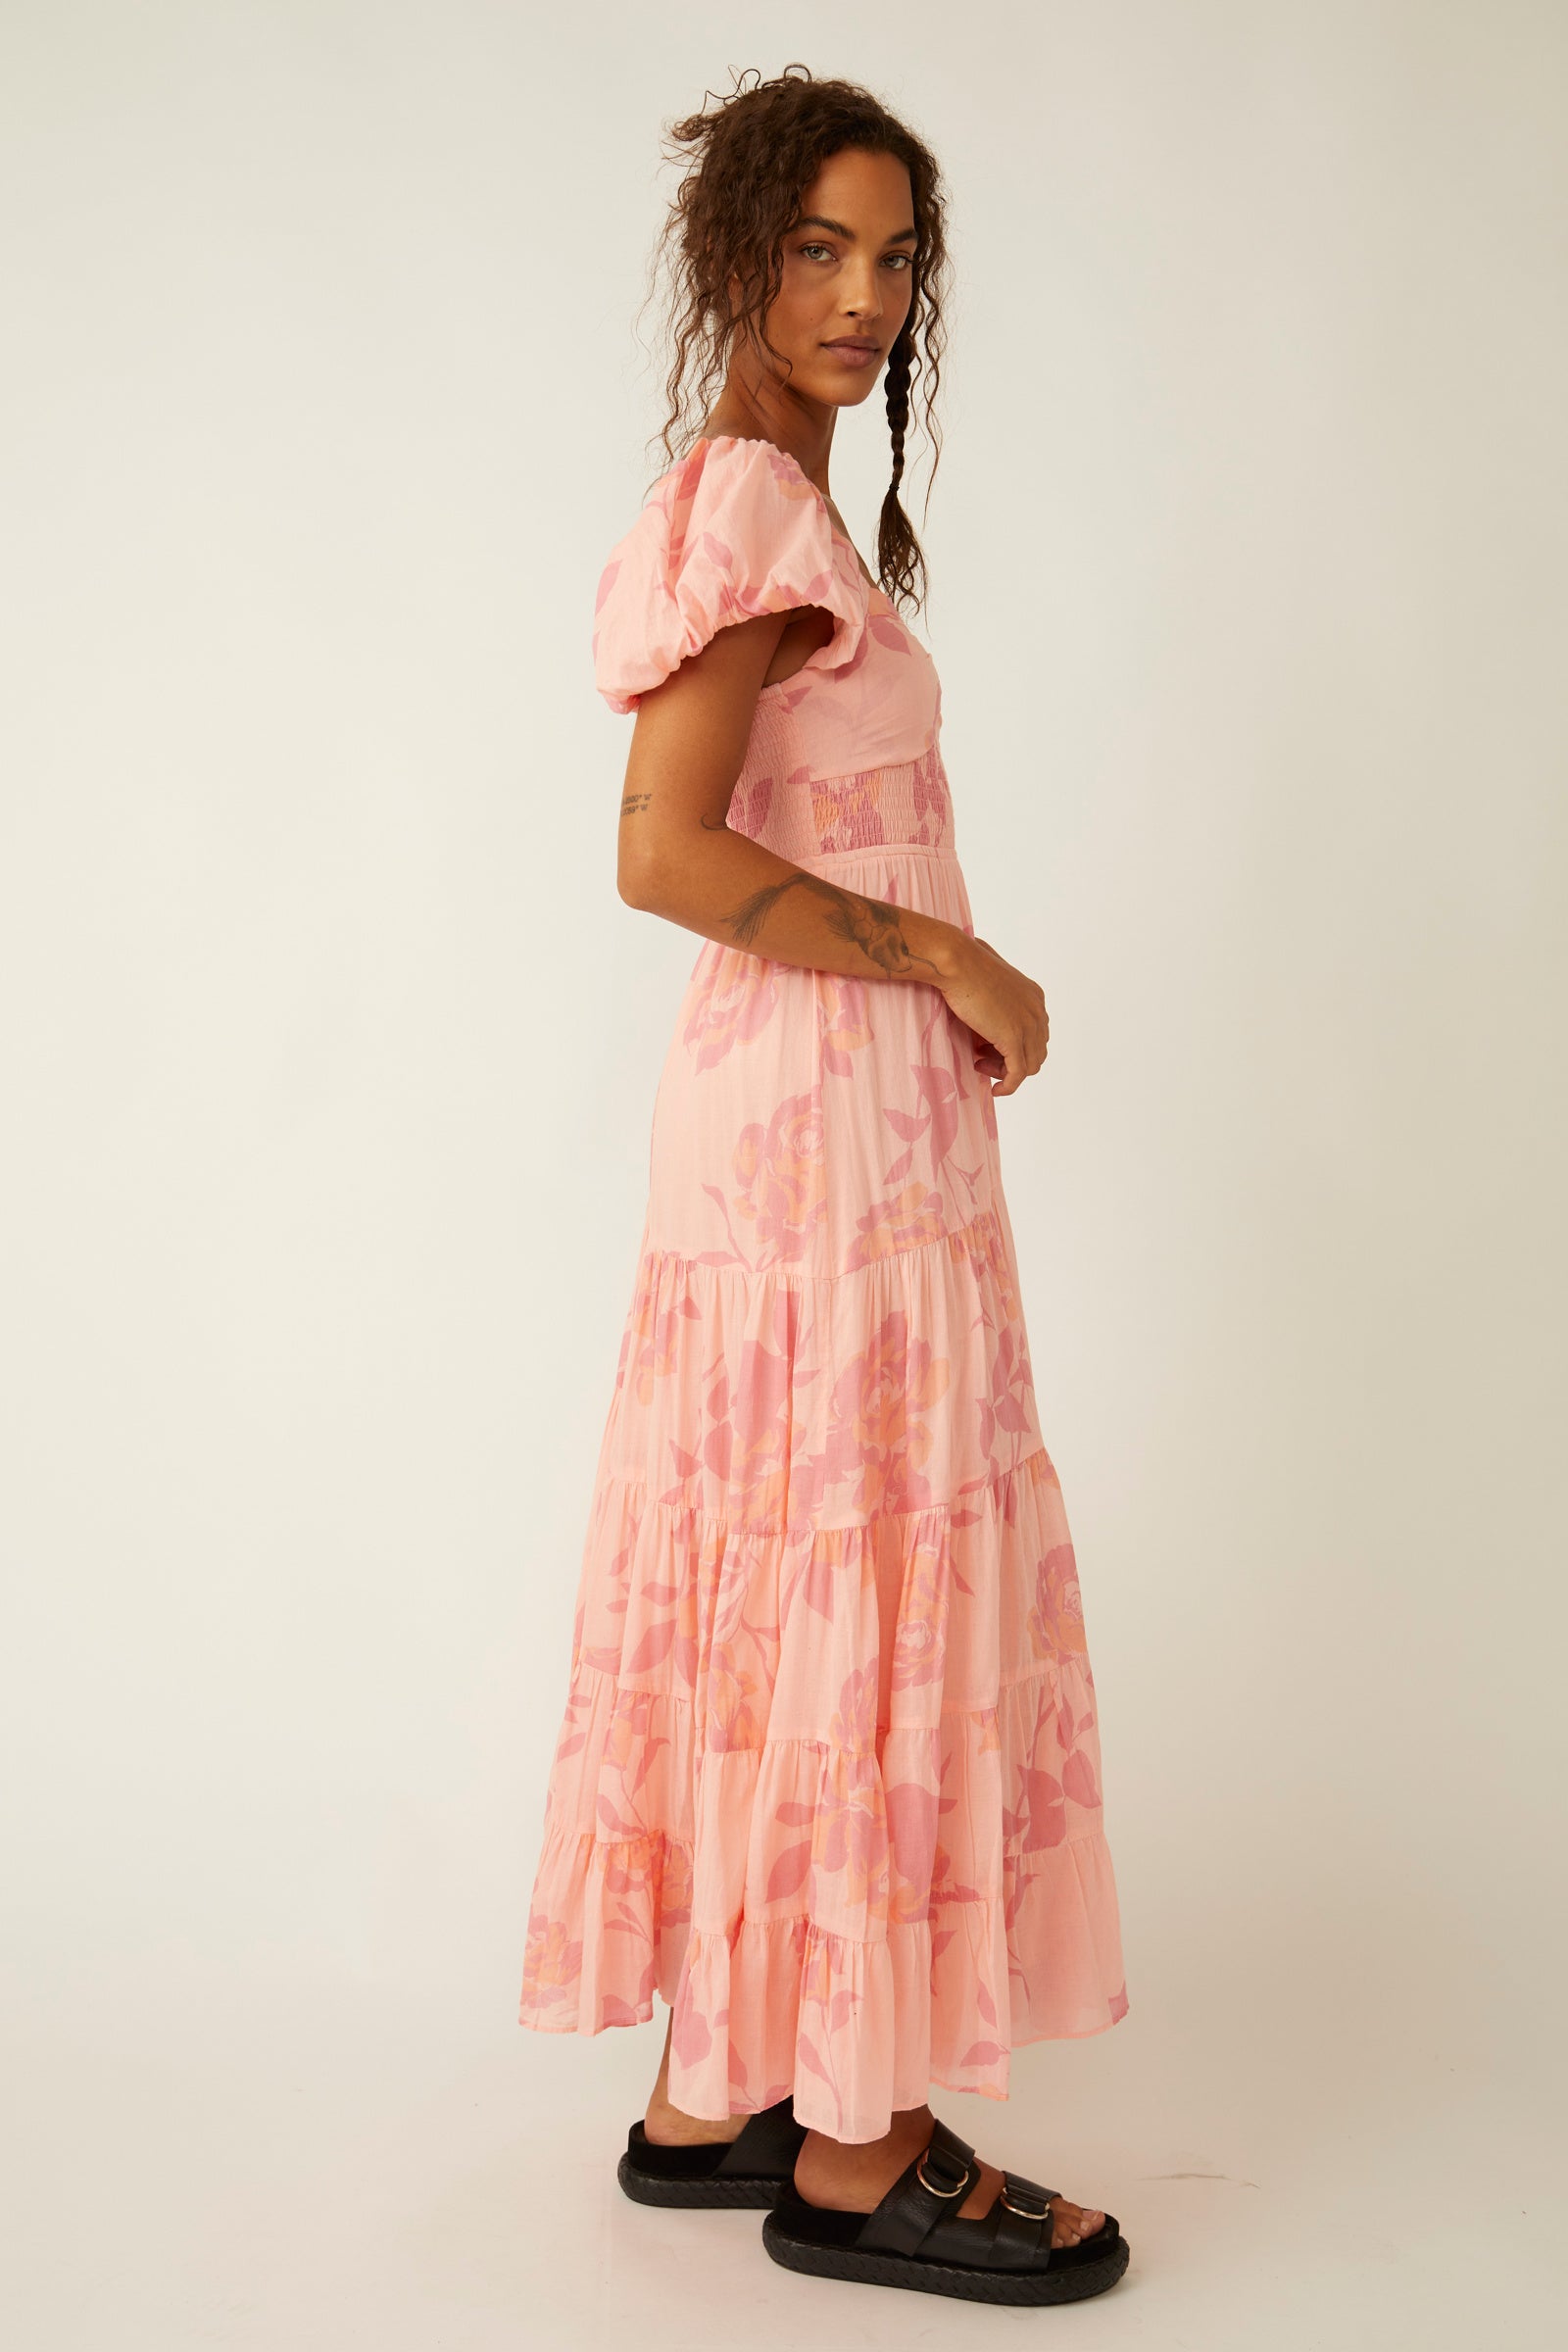 FREE PEOPLE-"SUNDRENCHED" DRESS